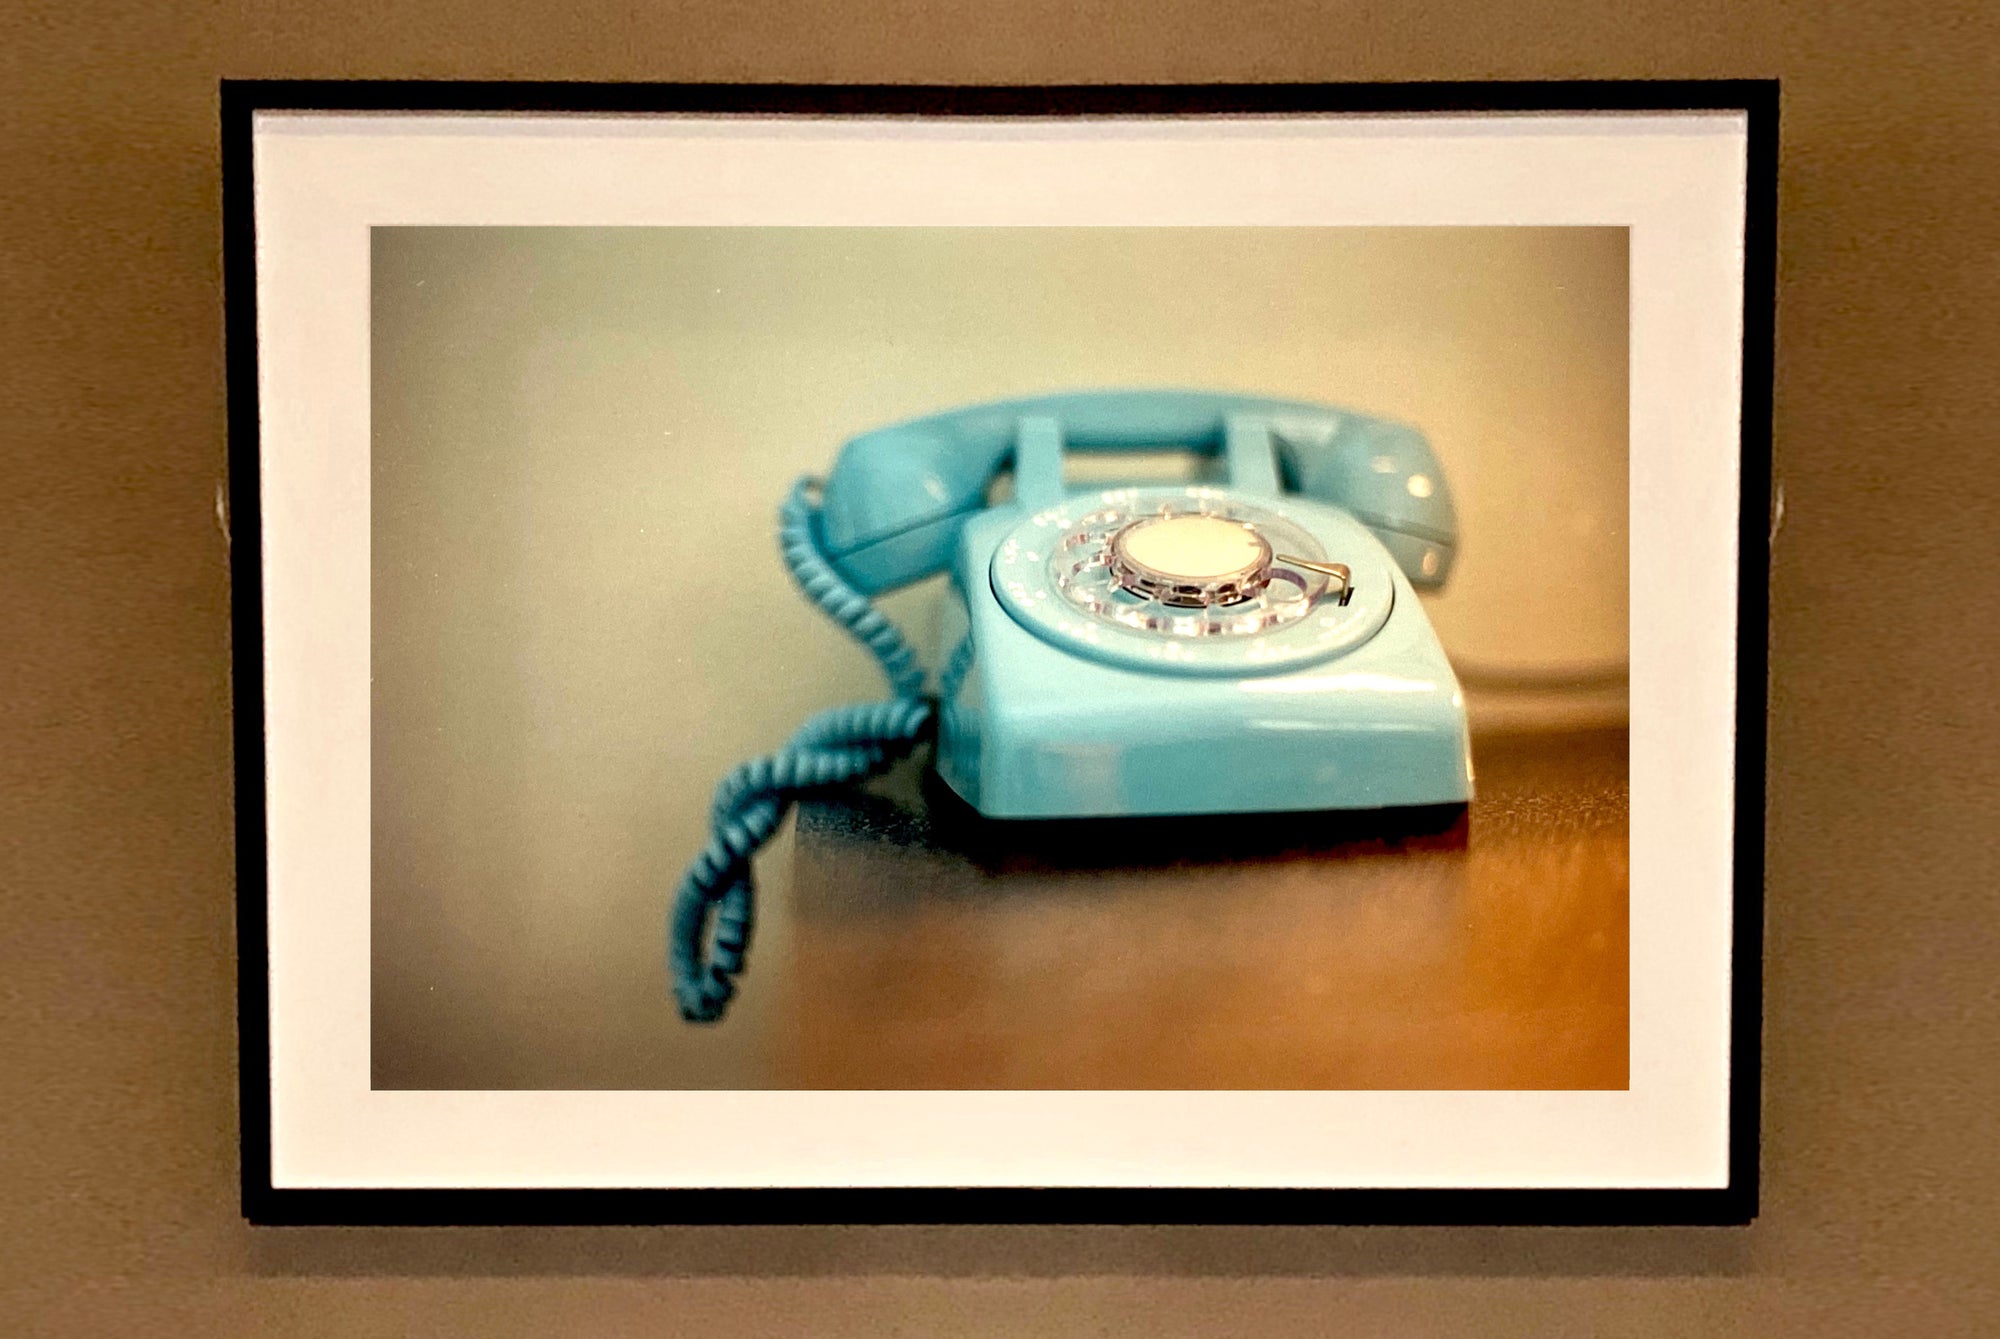 Telephone VII, Ballantines Movie Colony is part of Richard Heeps 'Dream in Colour' Series. This cool Palm Springs interior picture featuring a vintage telephone on a nightstand combines gorgeous colours with a dreamy nostalgic mid-century vibe.